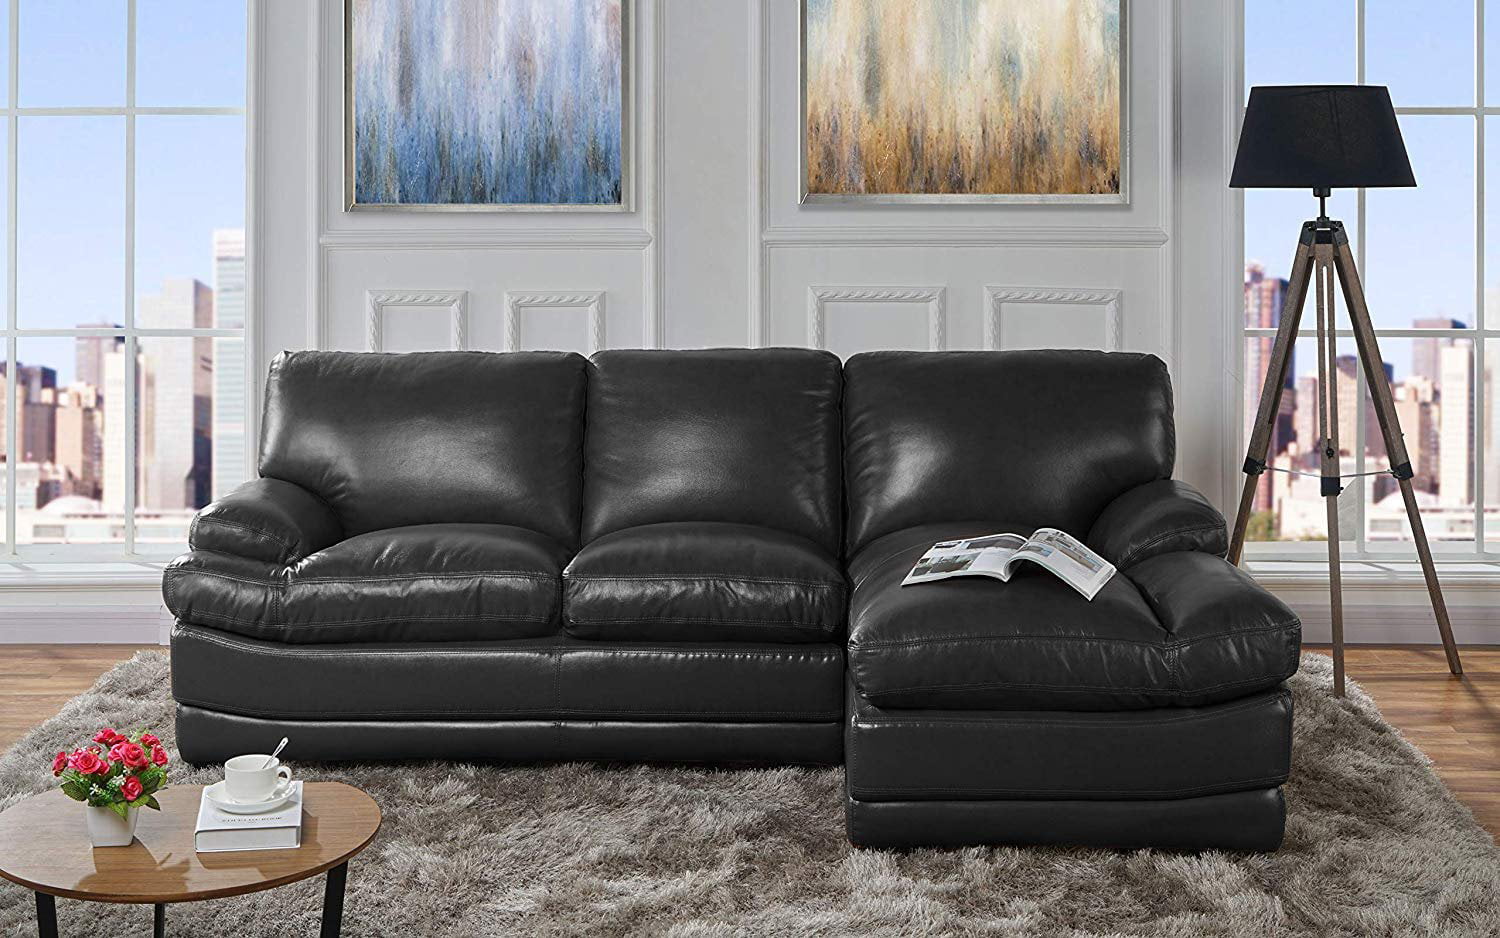 leather chaise lounge sofa bed